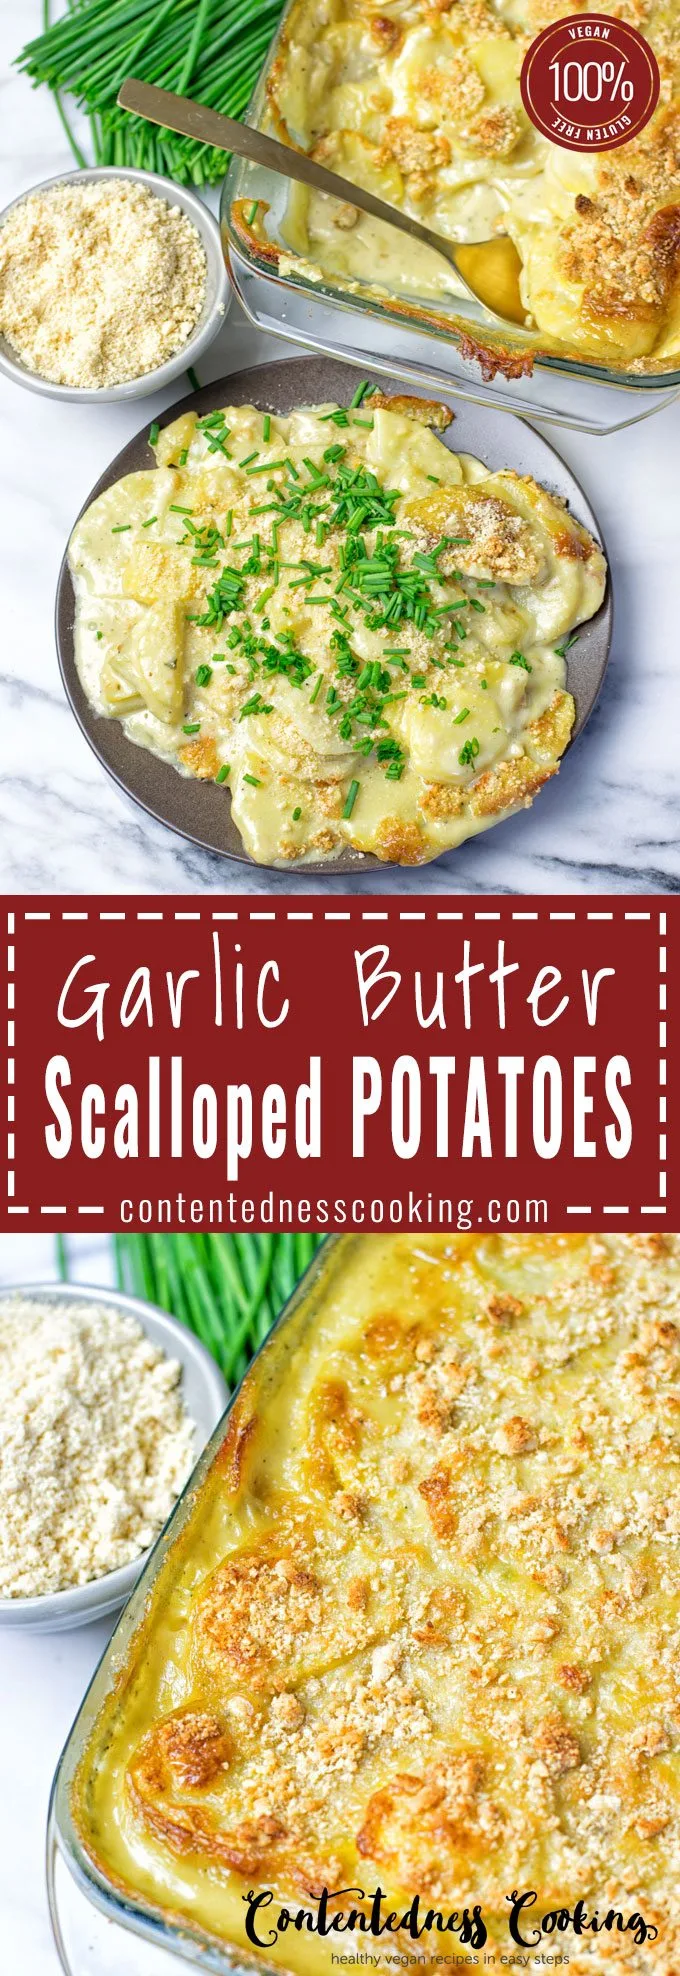 Collage of two pictures of the Garlic Butter Scalloped Potatoes with recipe title text.